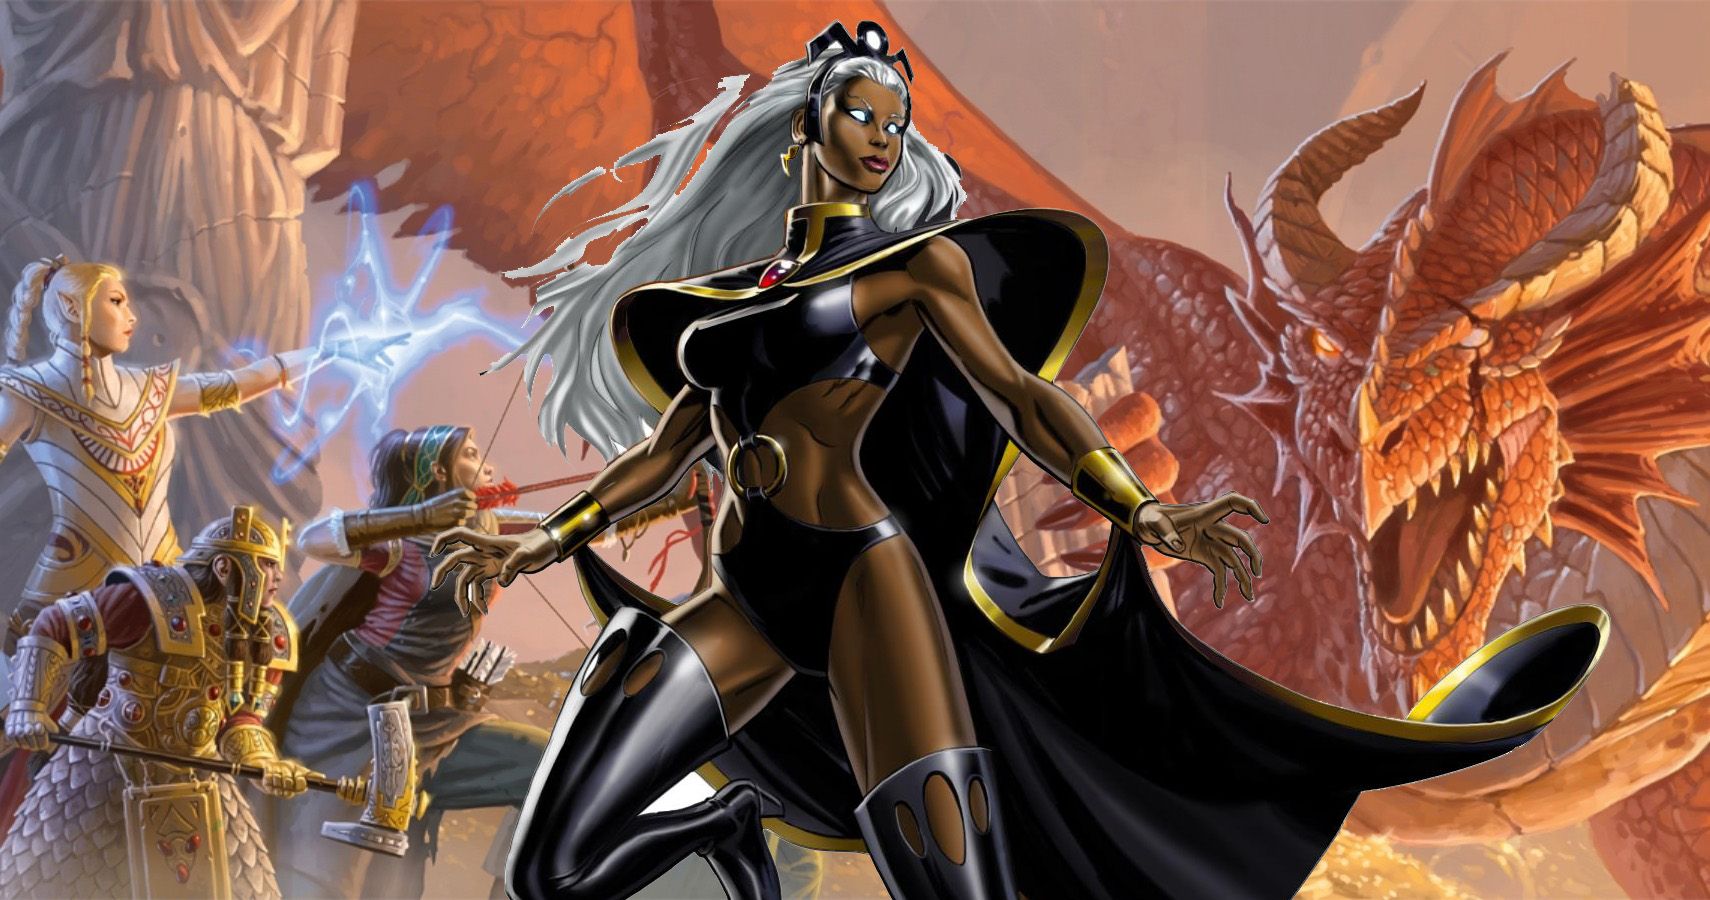 How To Build Storm From The XMen In Dungeons & Dragons